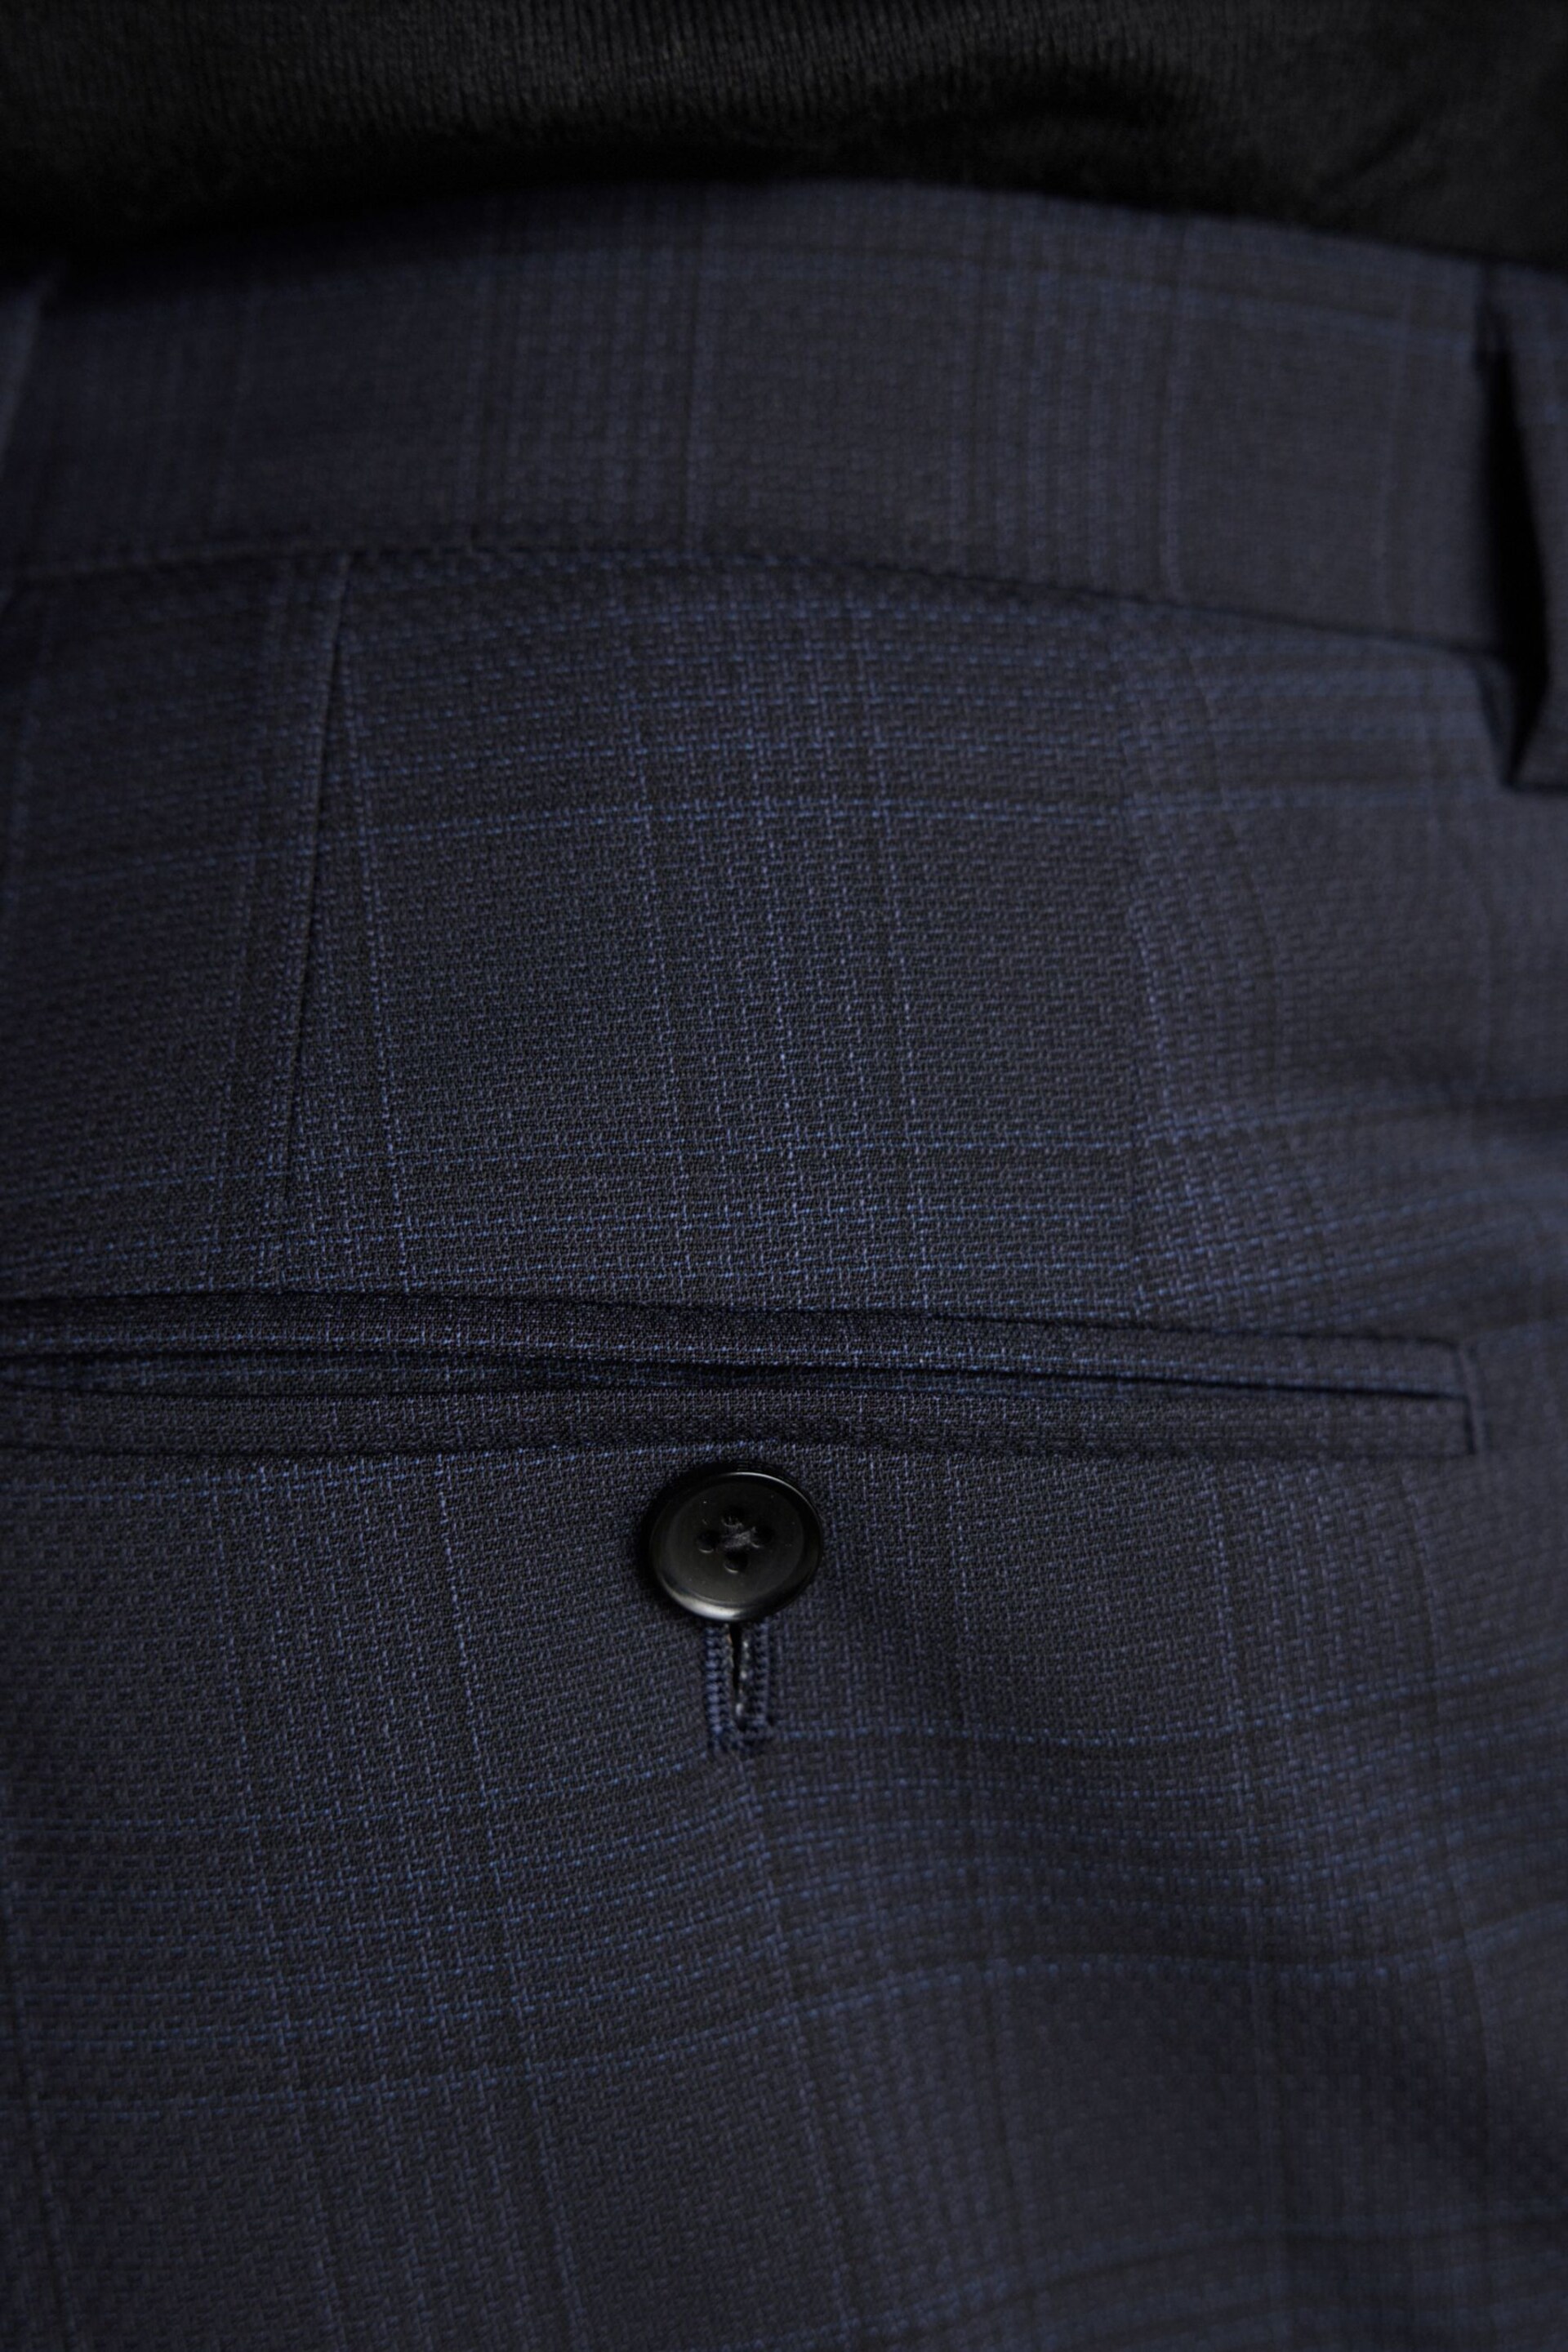 Navy Blue Signature Zignone Italian Fabric Check Suit Trousers - Image 5 of 10